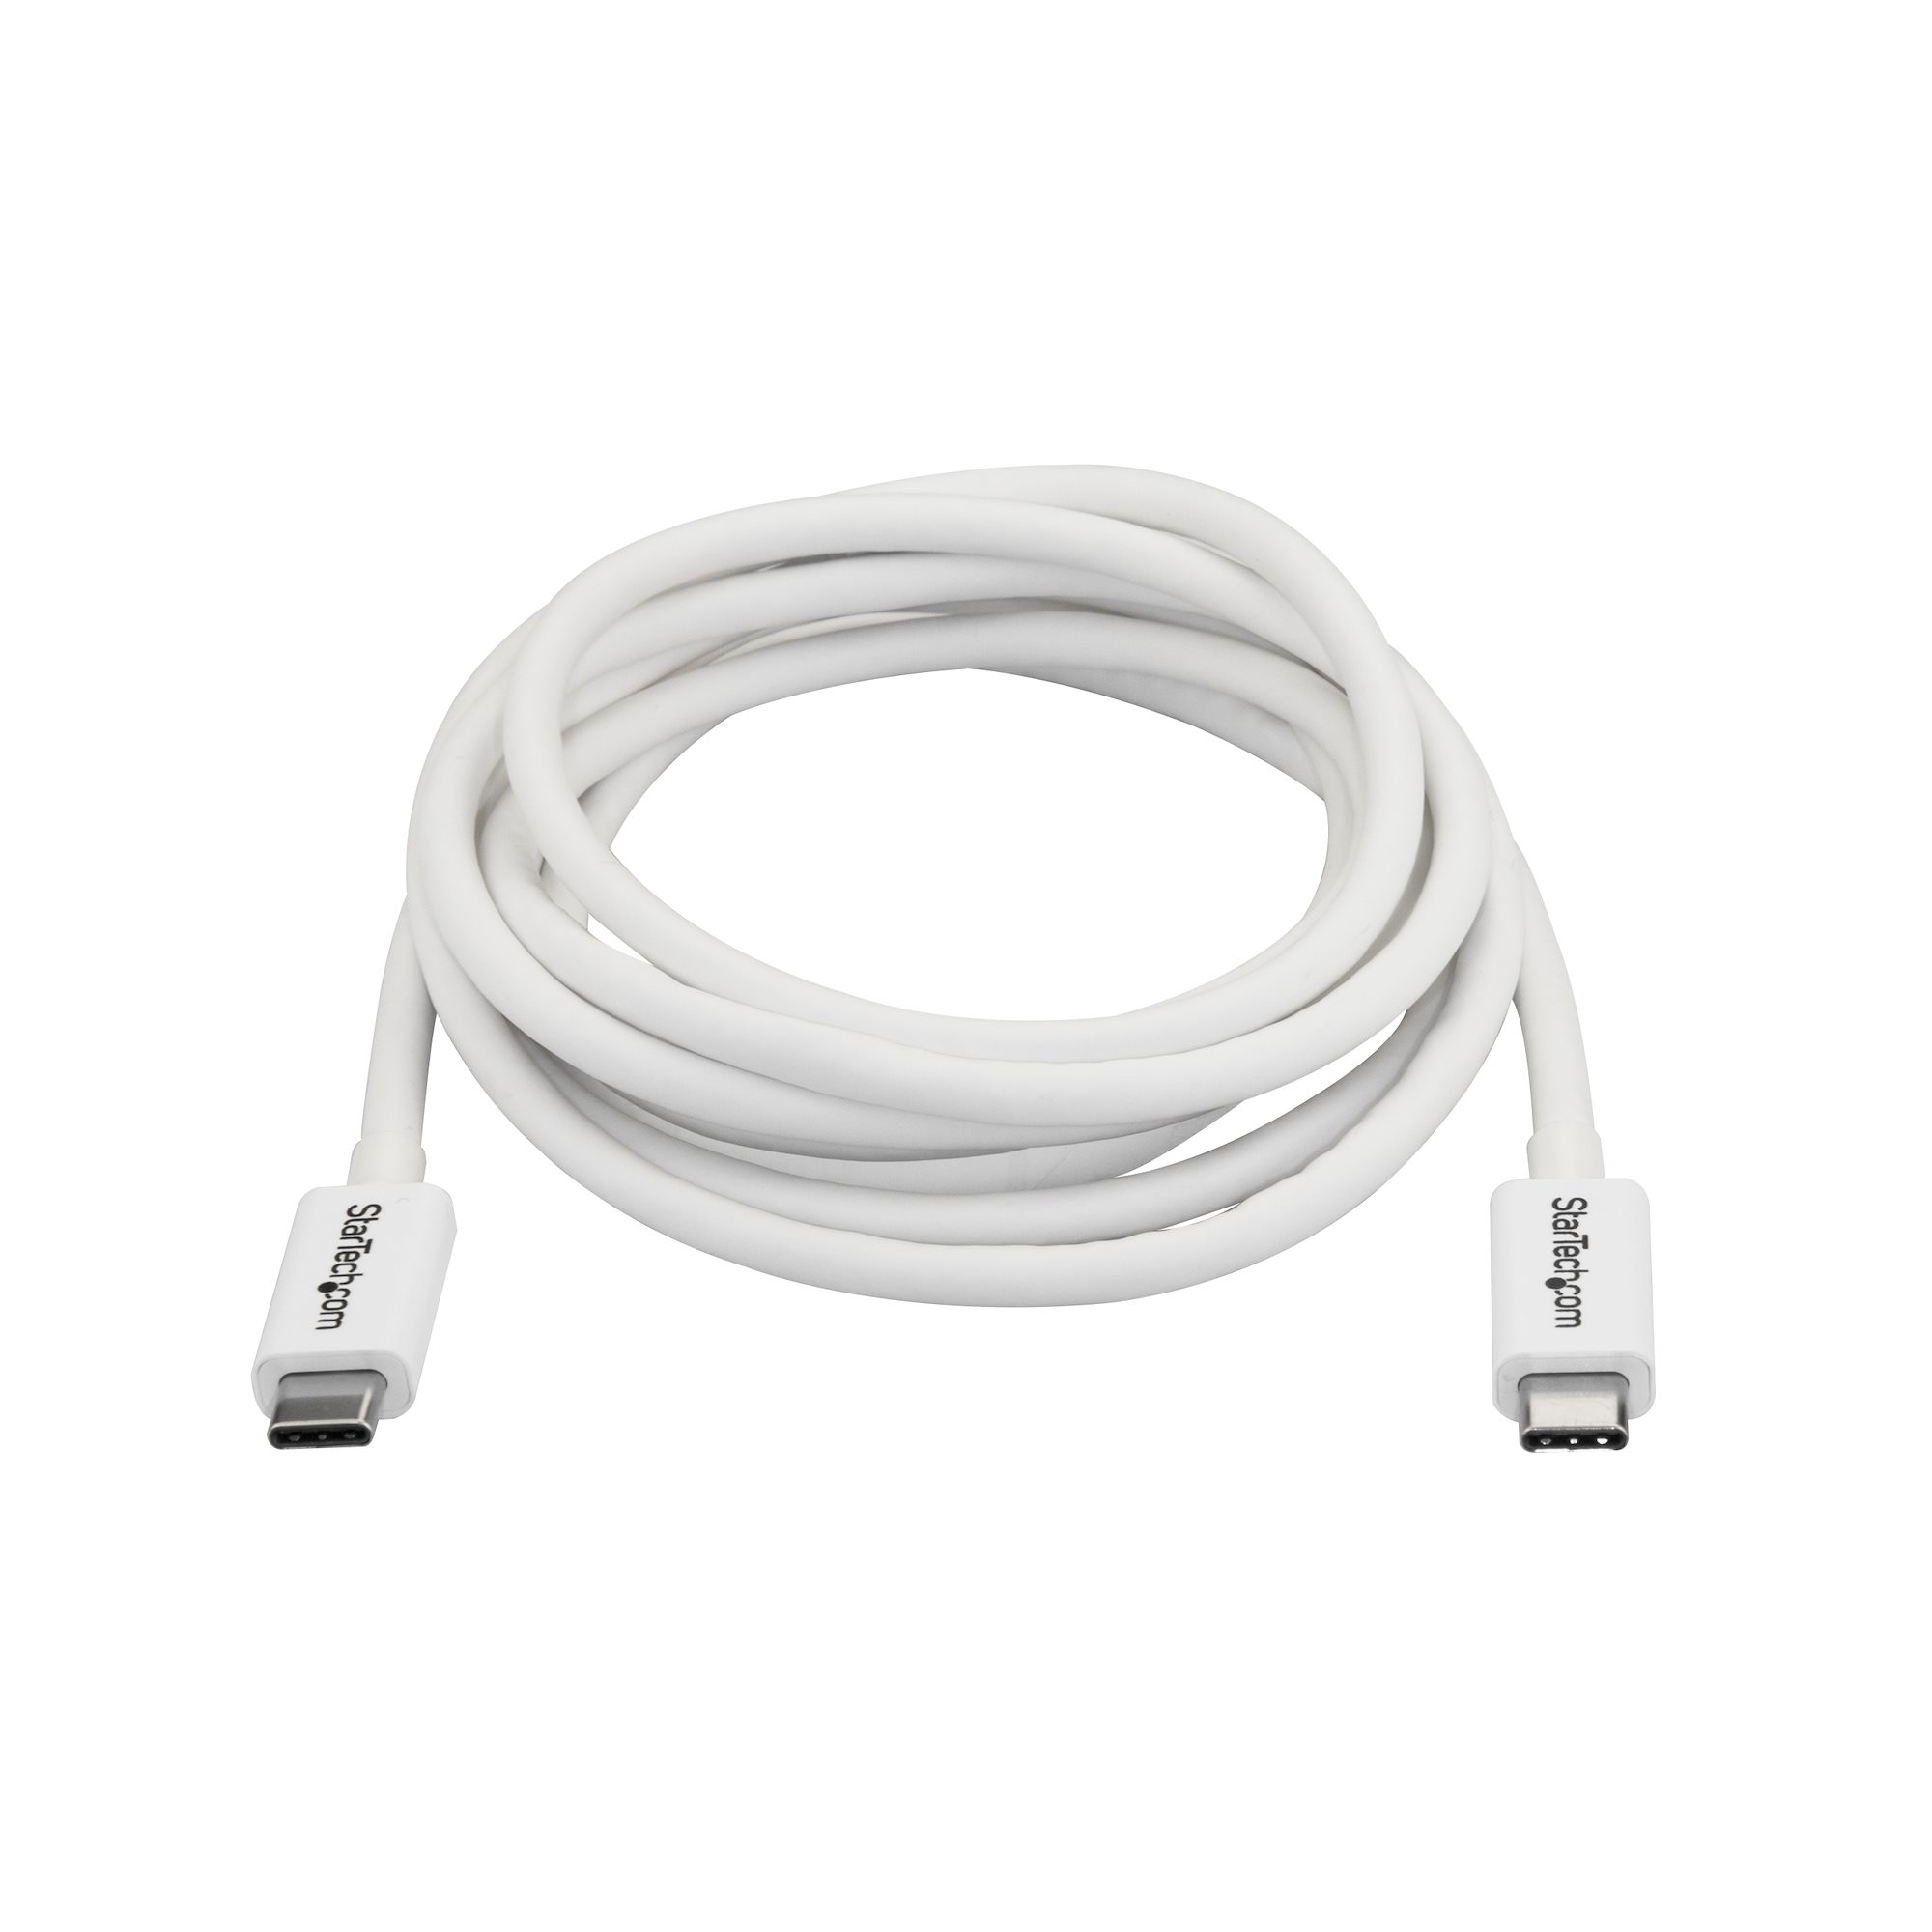 Thunderbolt 3 Cable 2m 20Gbps White - Thunderbolt 3 Cables and Adapters